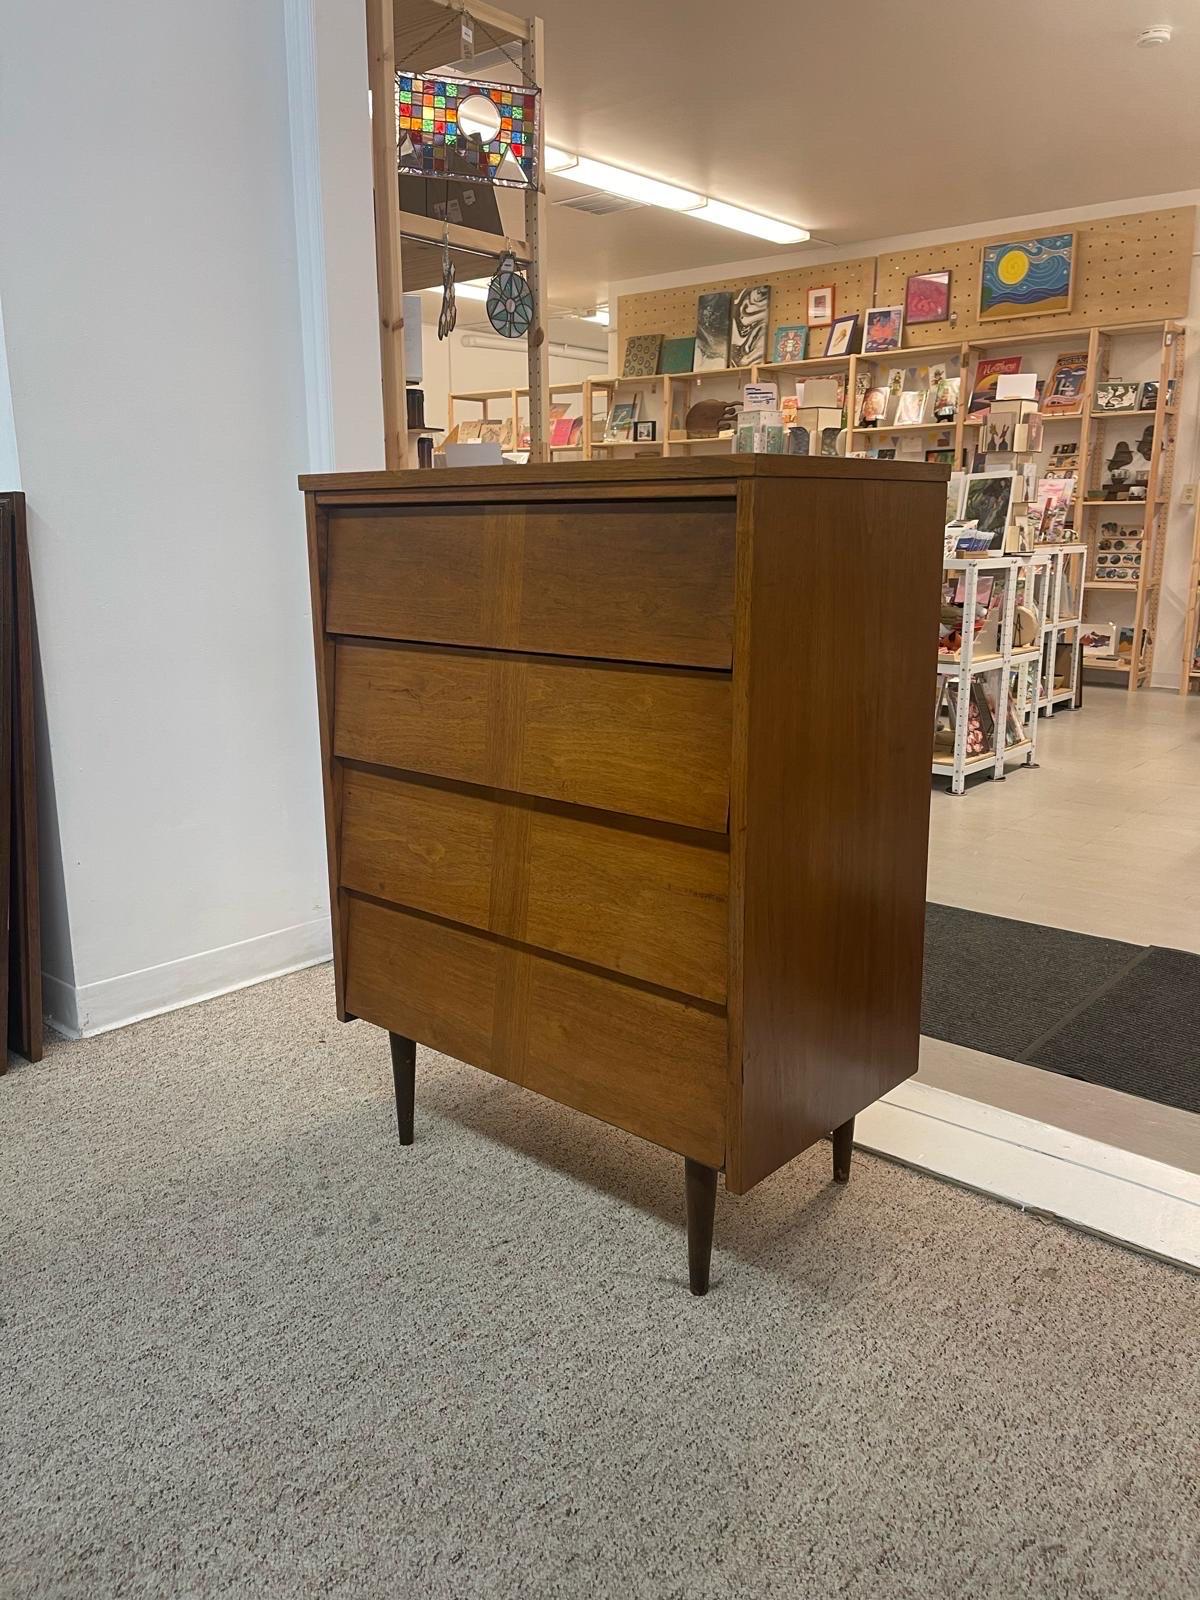 Late 20th Century Vintage Mid Century Modern Dresser With Dovetail Drawers.